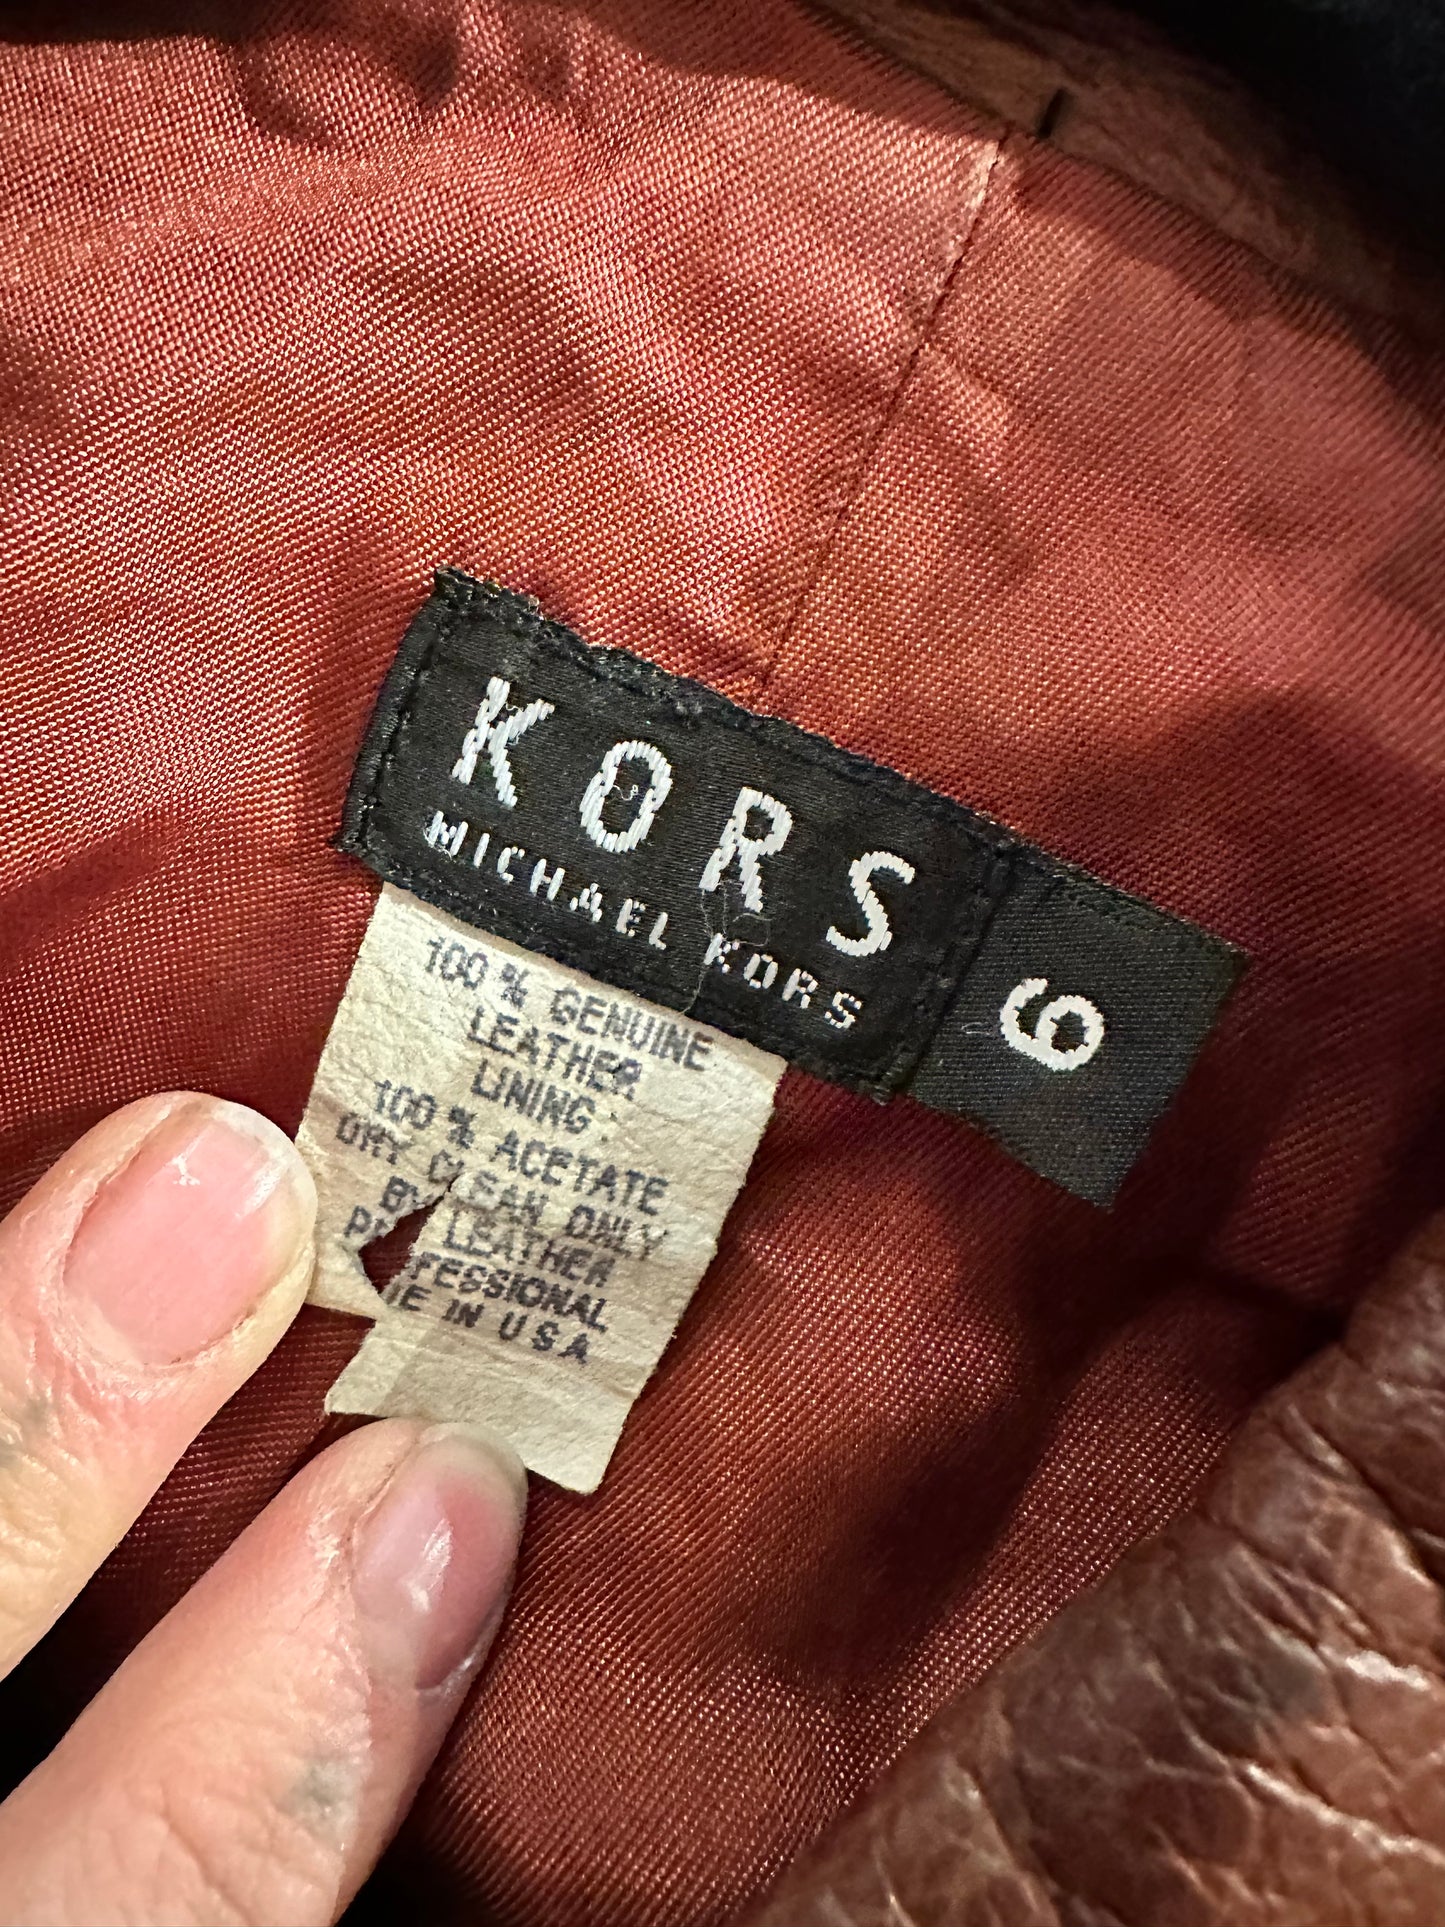 90s 'Michael Kors' Brown Leather Jacket / Small